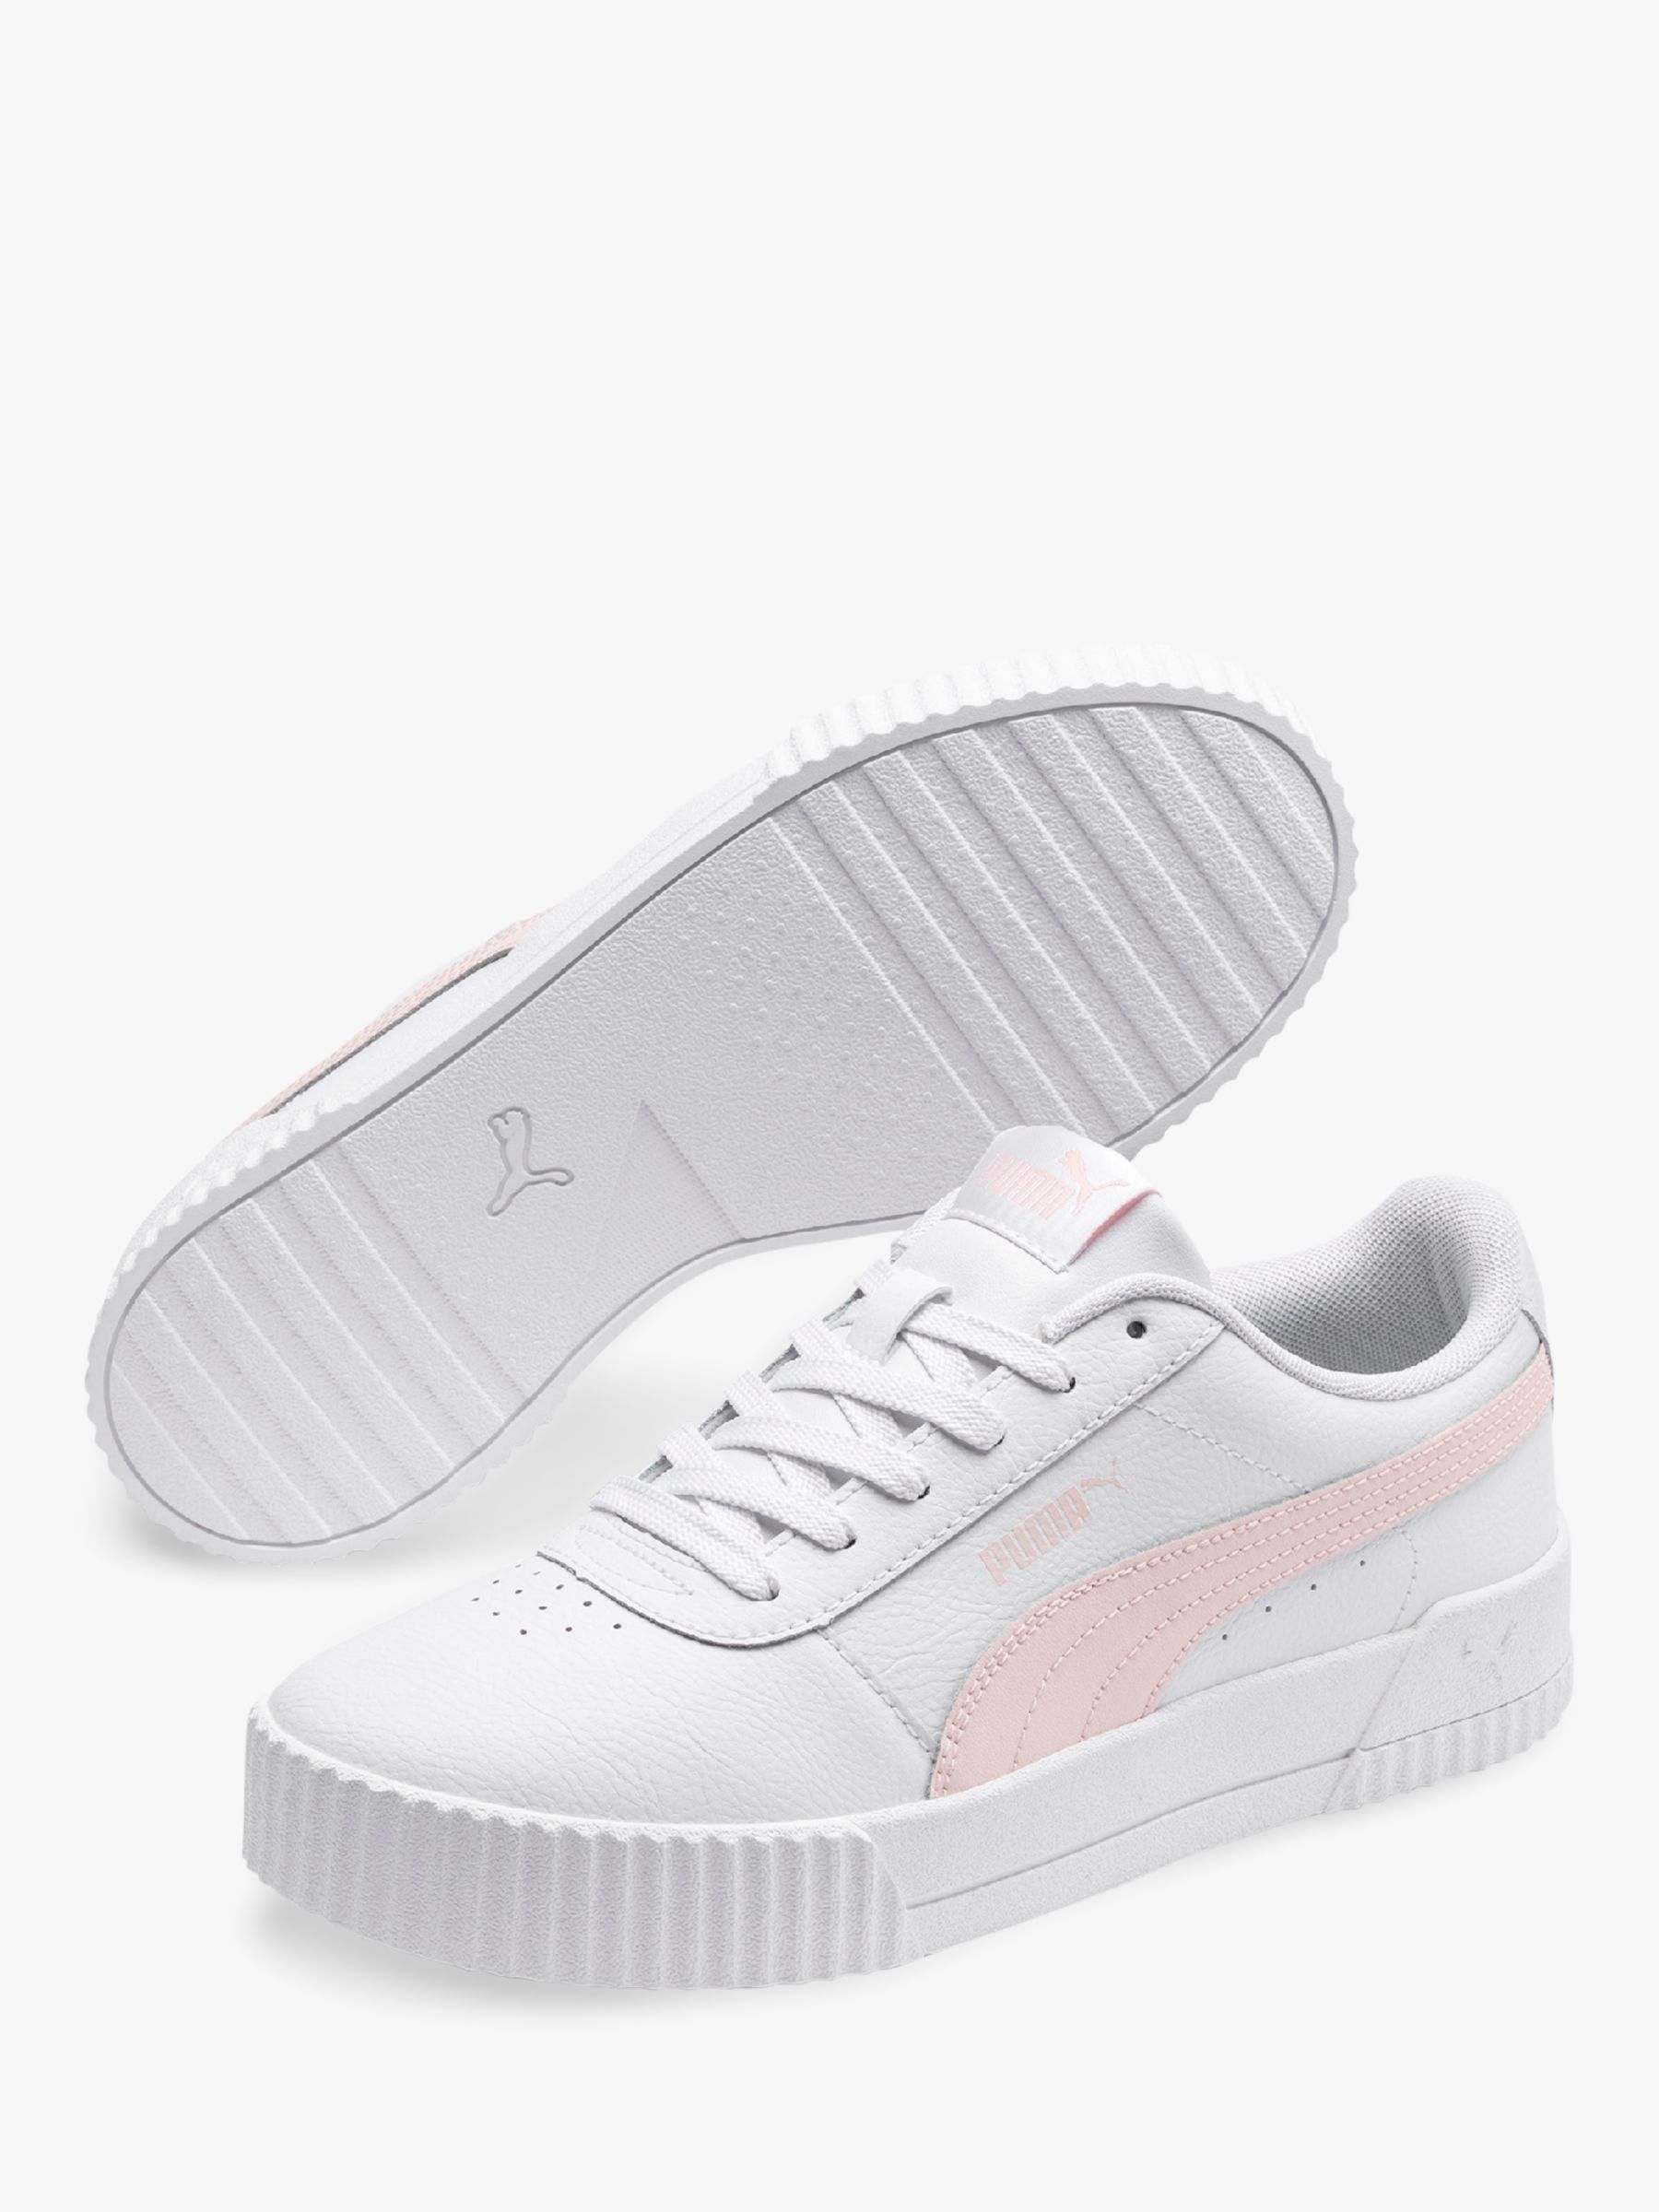 PUMA Carina Leather Women's Trainers, White/Pale Pink at John Lewis ...